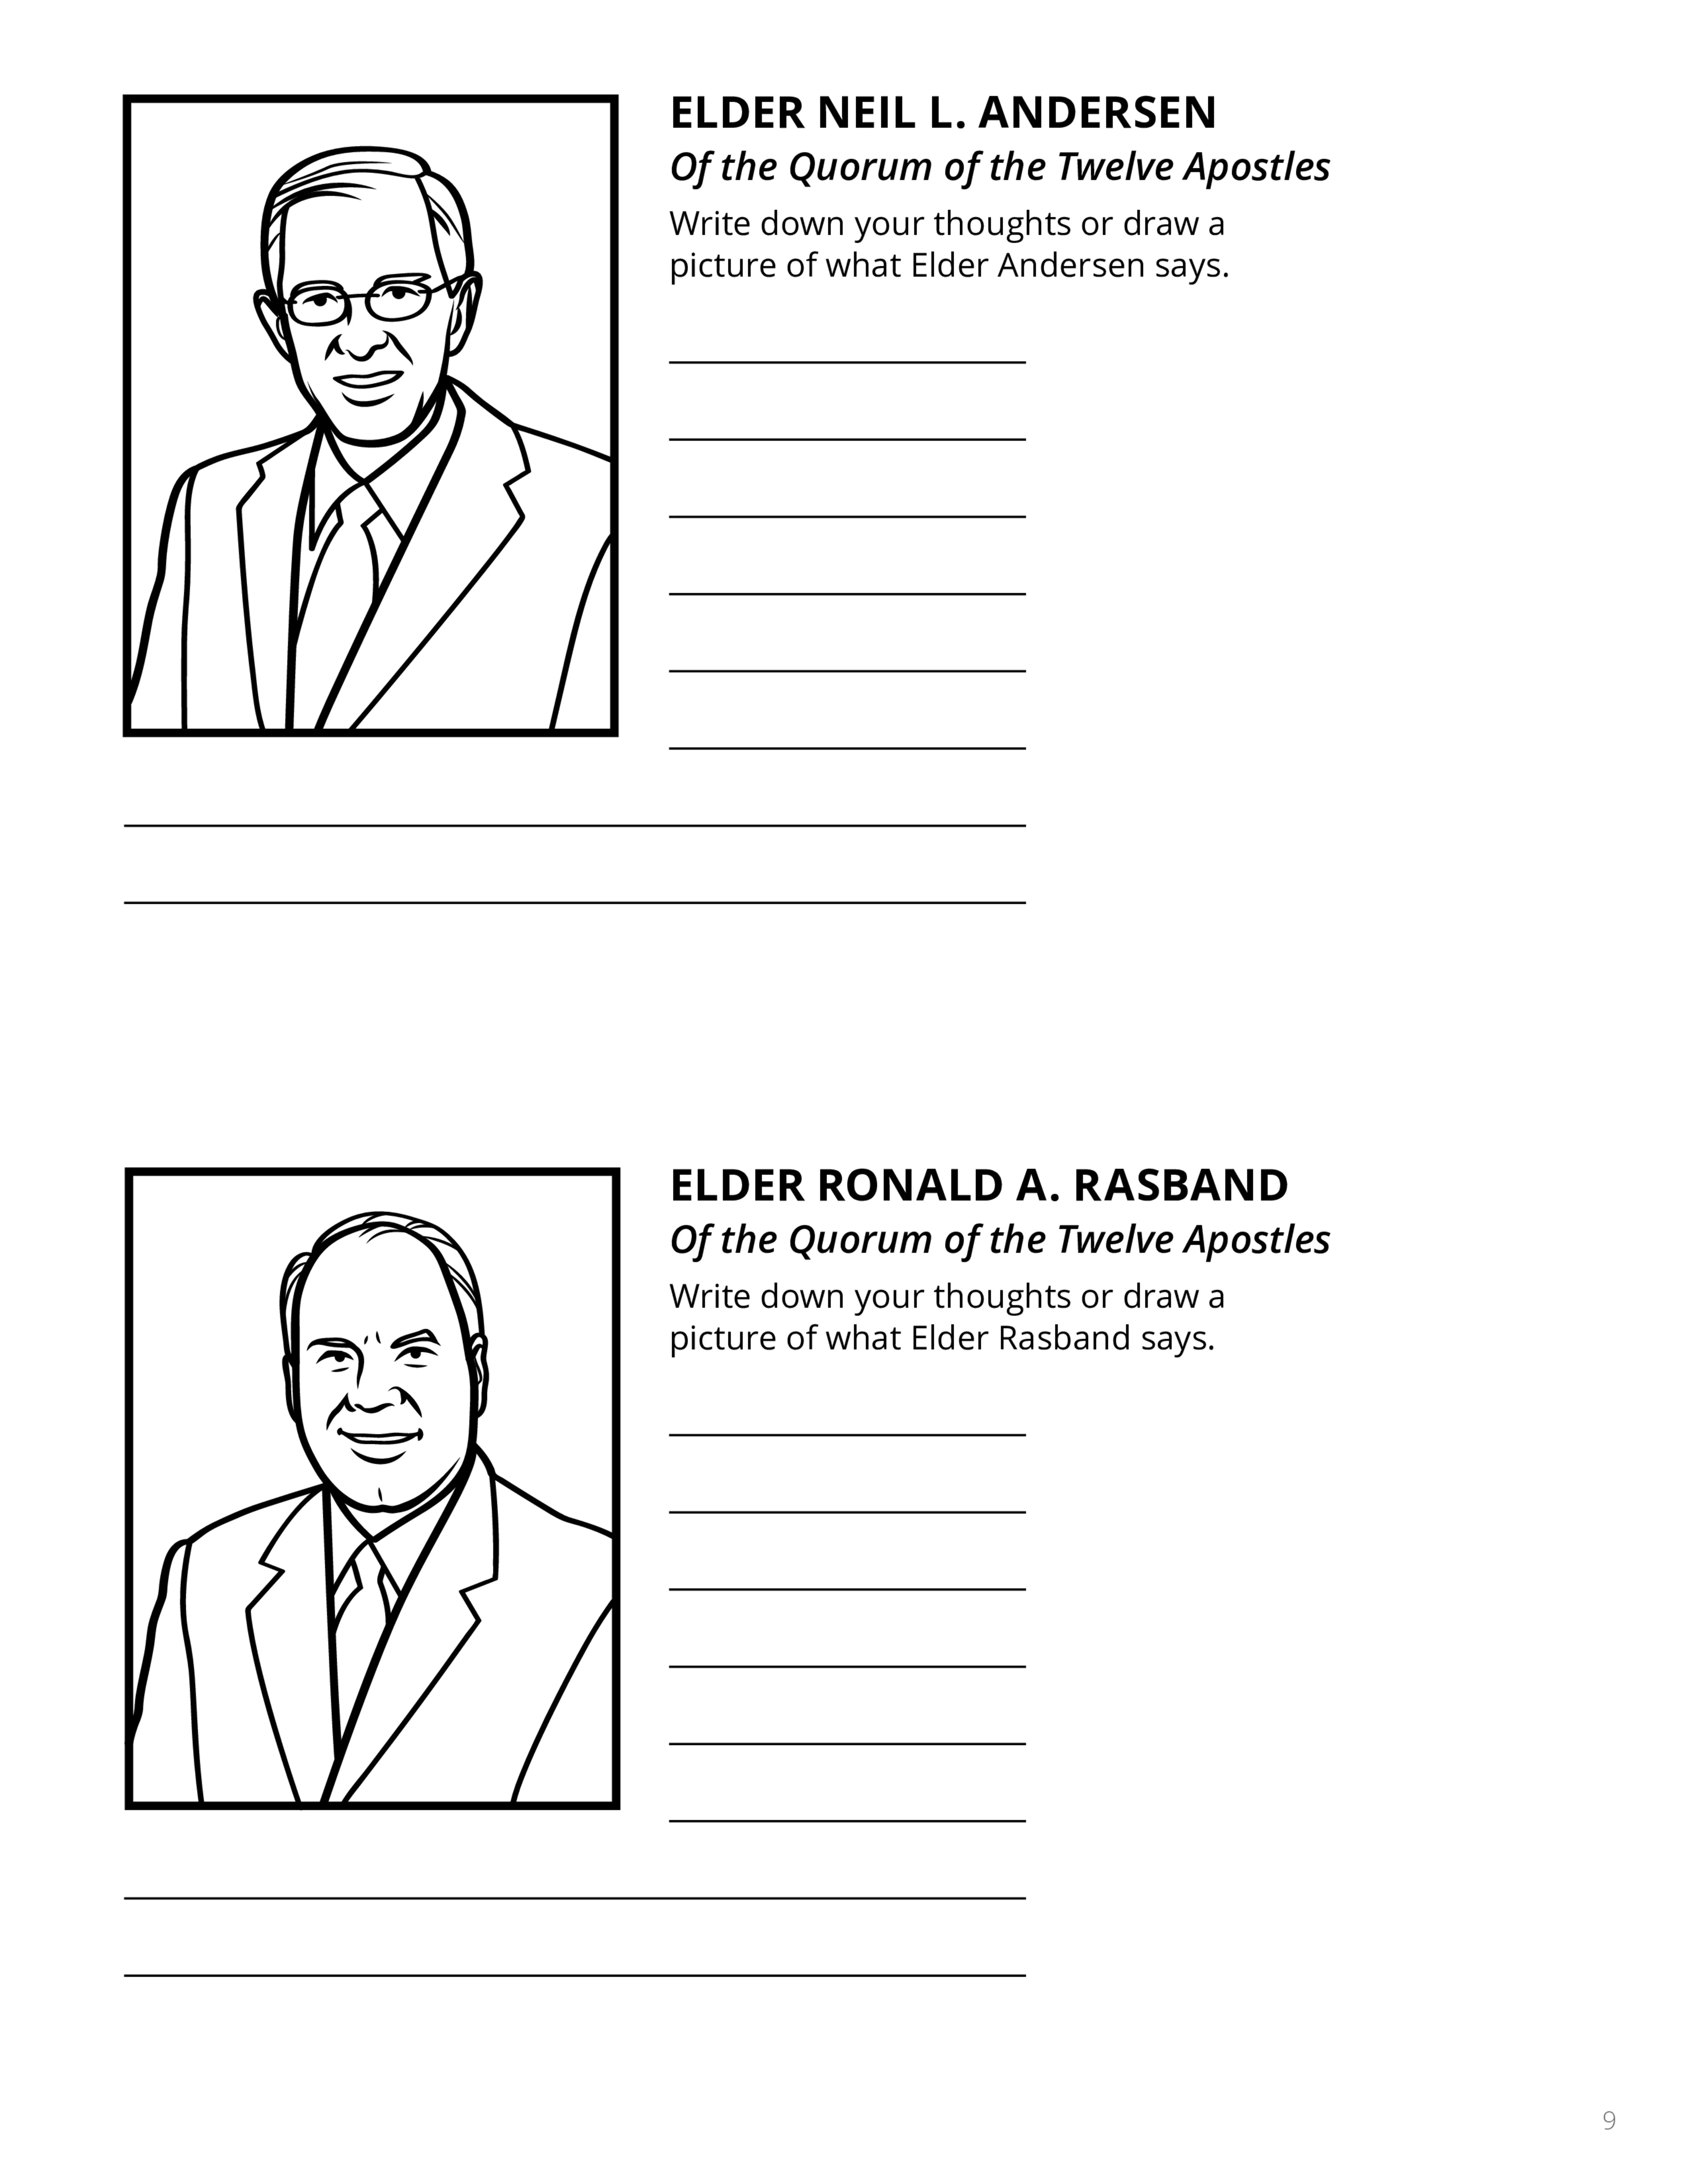 An activity page to encourage children to listen and write down thoughts or draw a picture of what Neil L. Anderson and Ronald A. Rasband say.